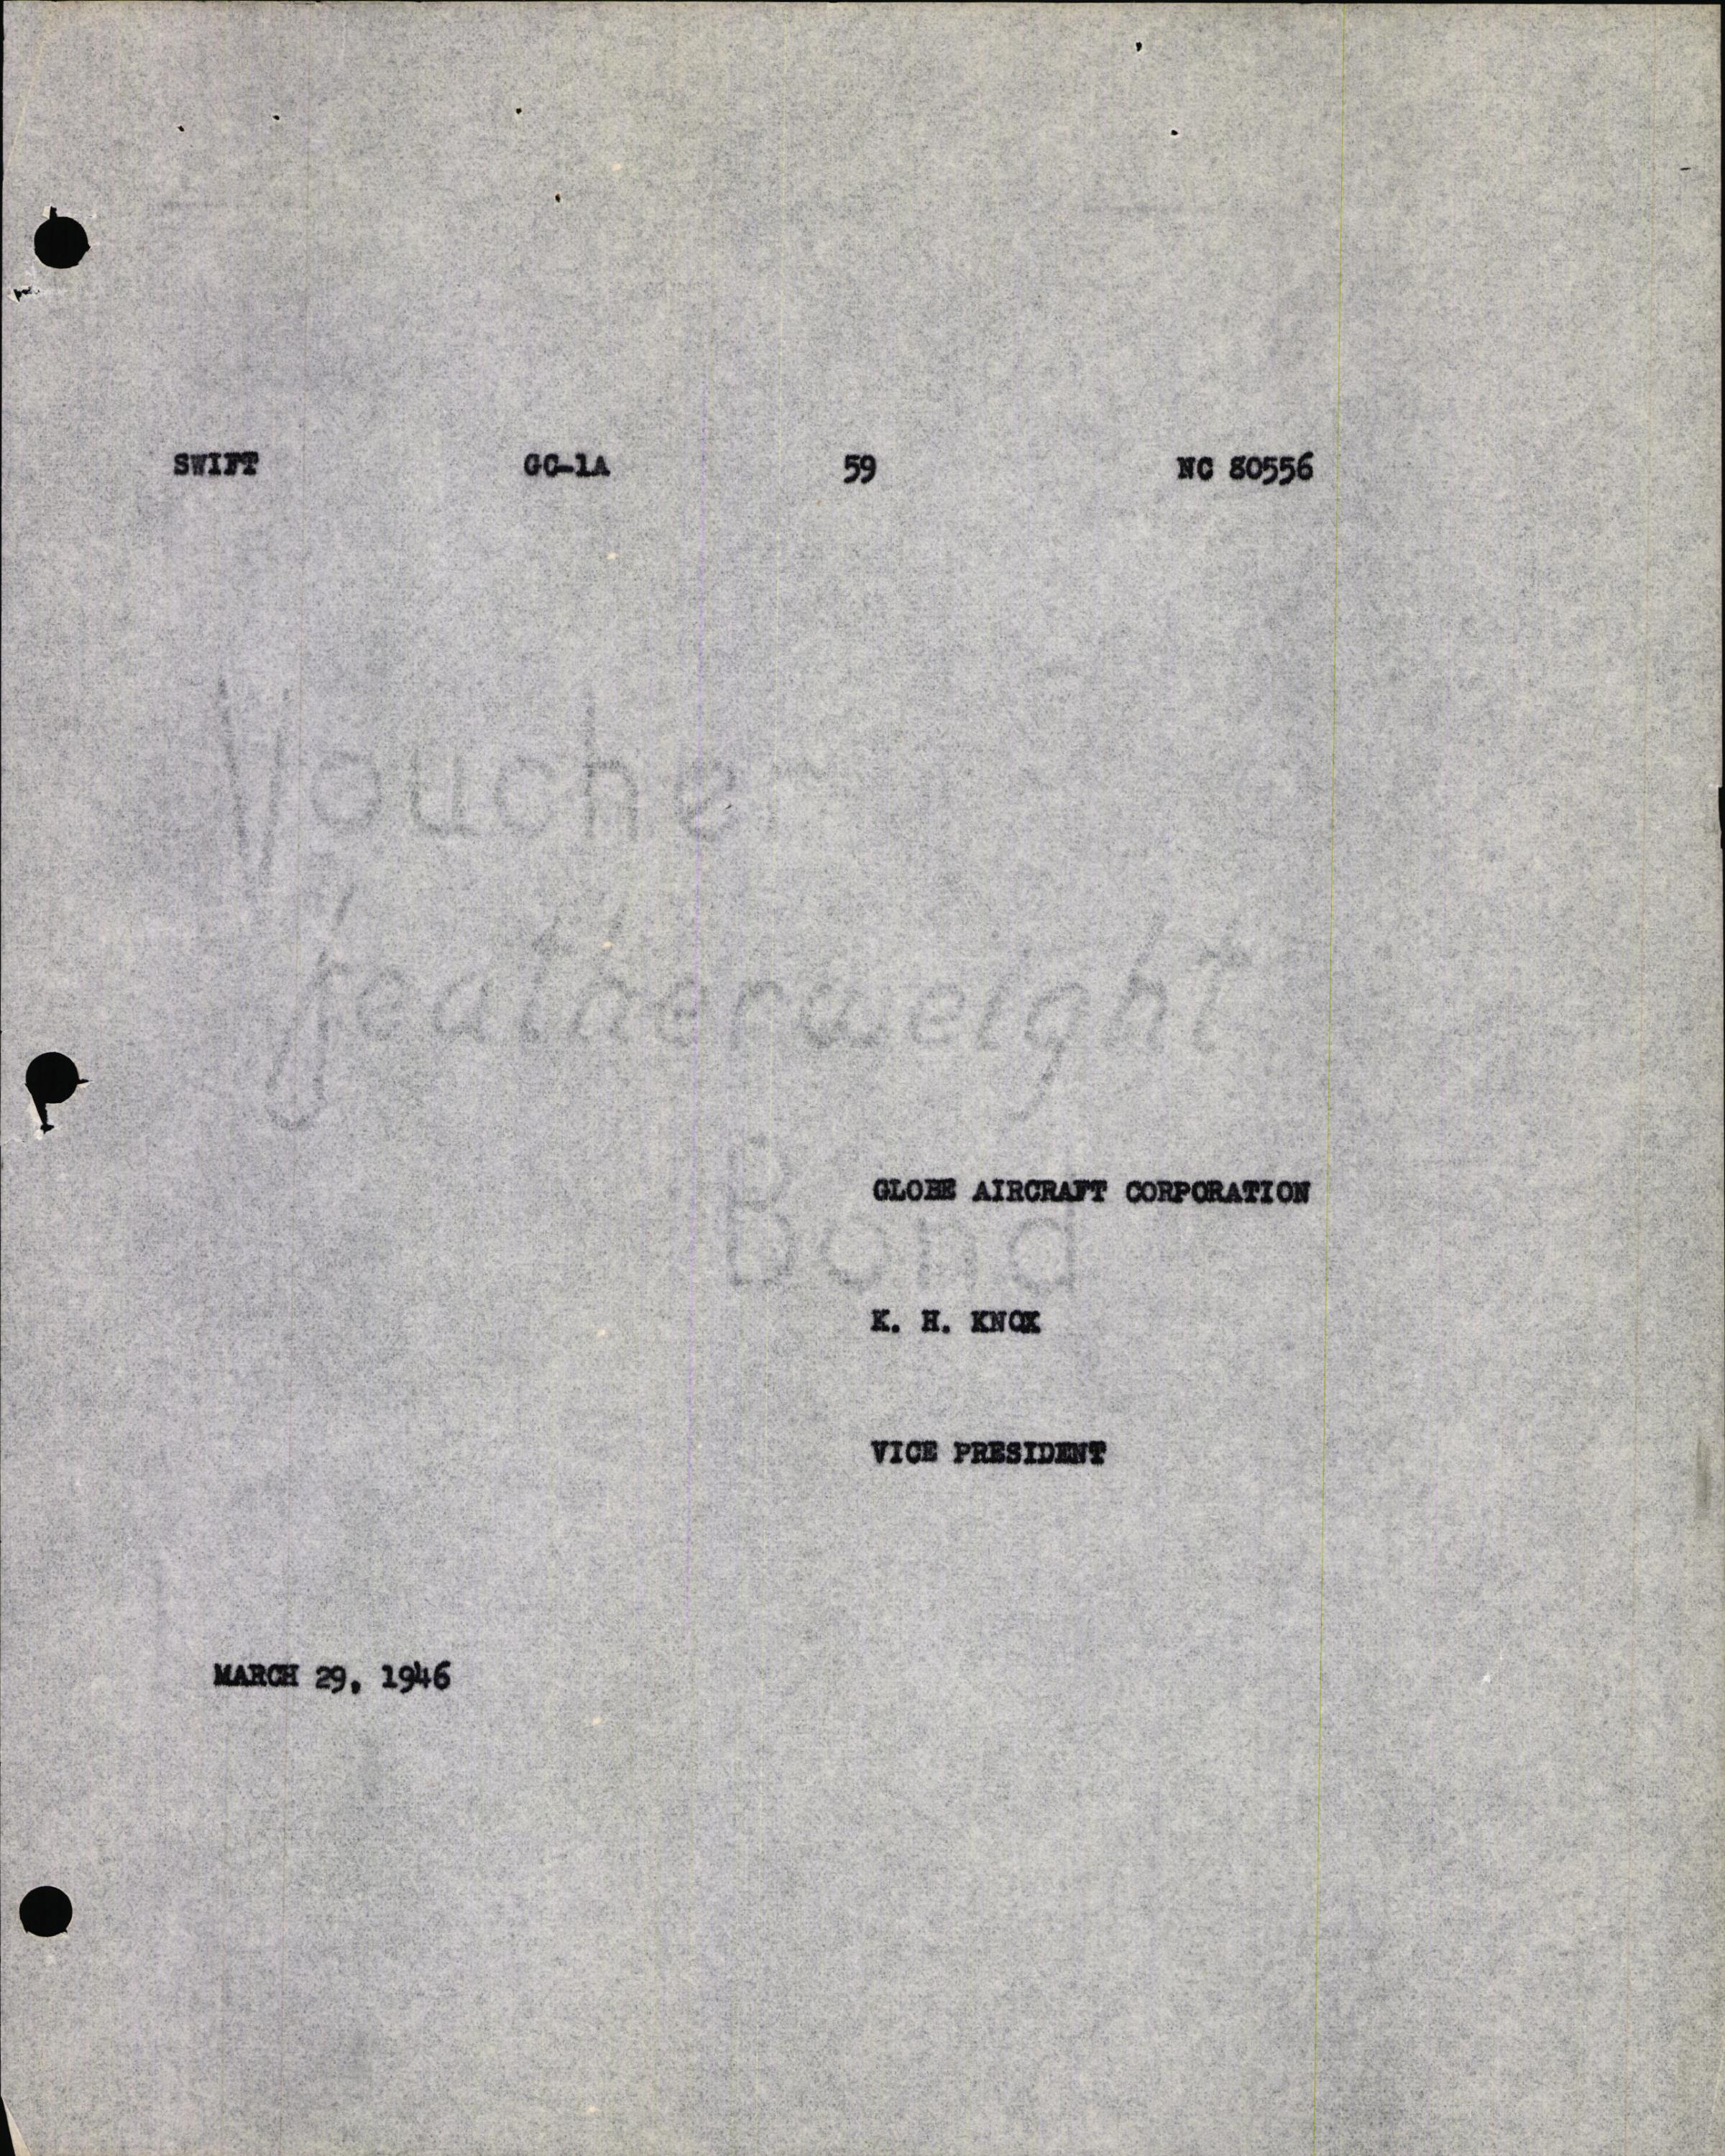 Sample page 5 from AirCorps Library document: Technical Information for Serial Number 59